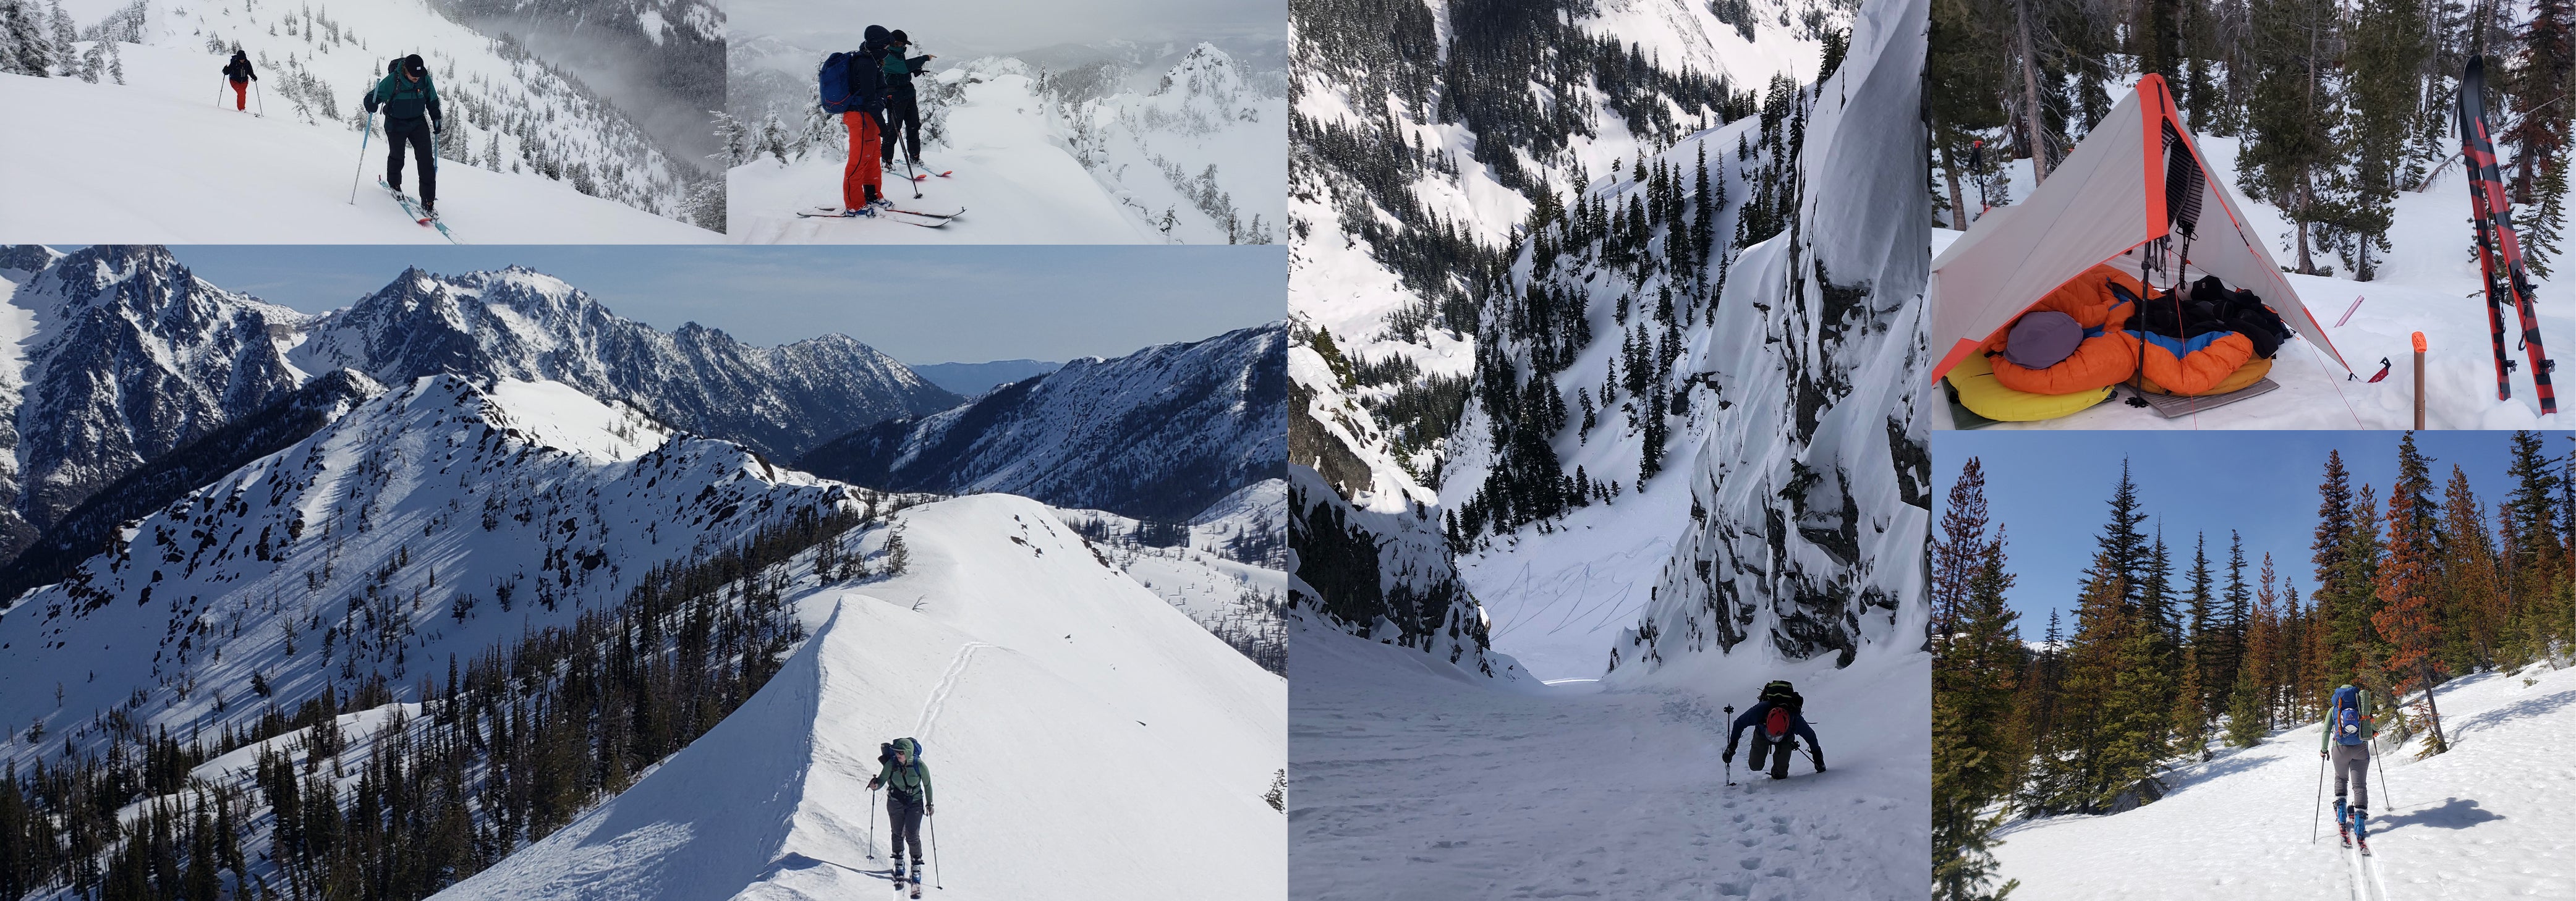 A collage of images depicts backcountry skiing, backcountry camping, etc.